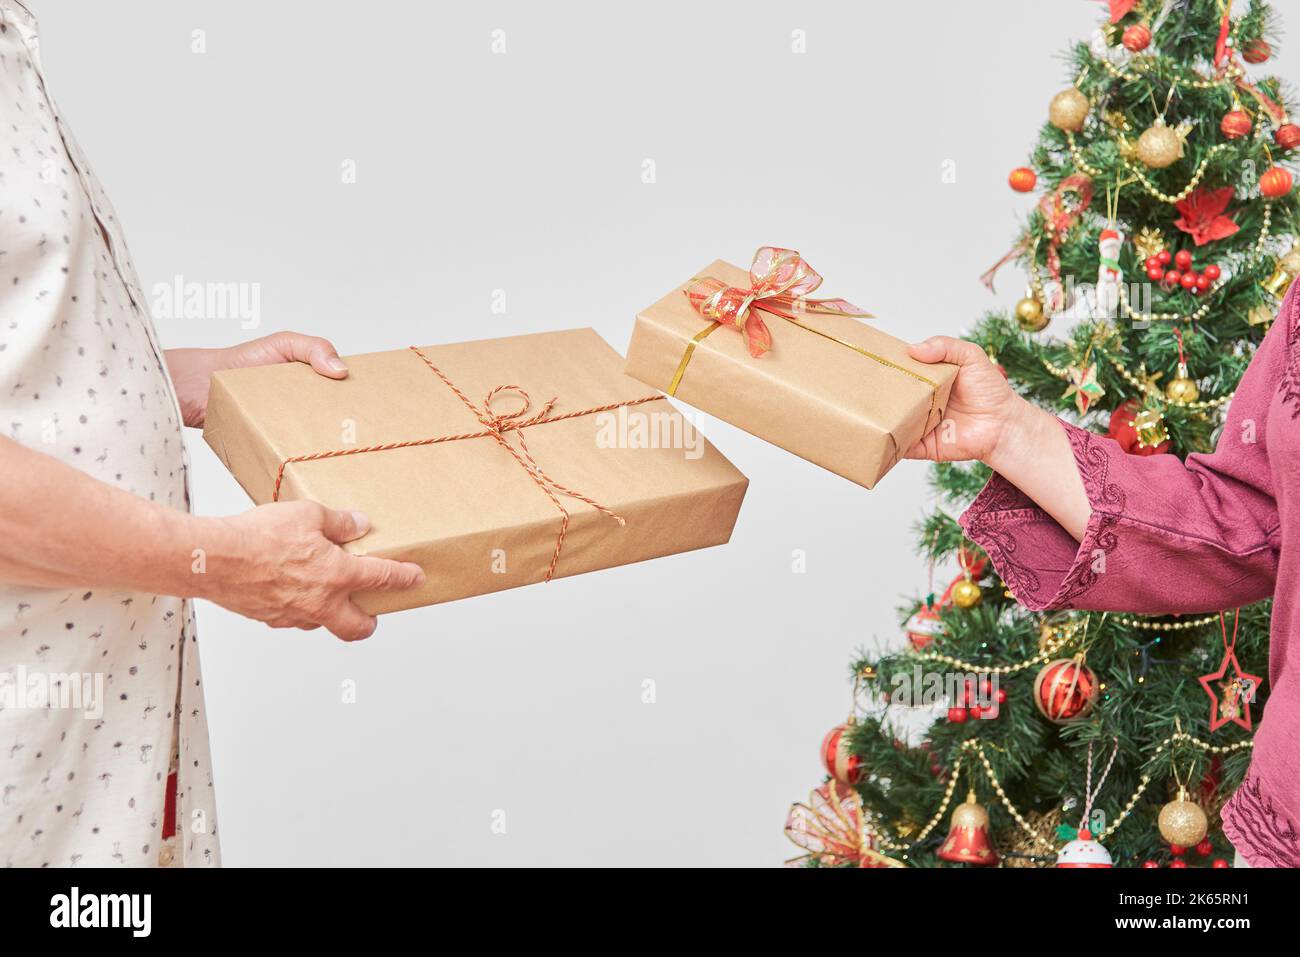 Unrecognizable adult latin couple celebrating the holidays at home together, exchanging Christmas gifts near a decorated tree. Stock Photo